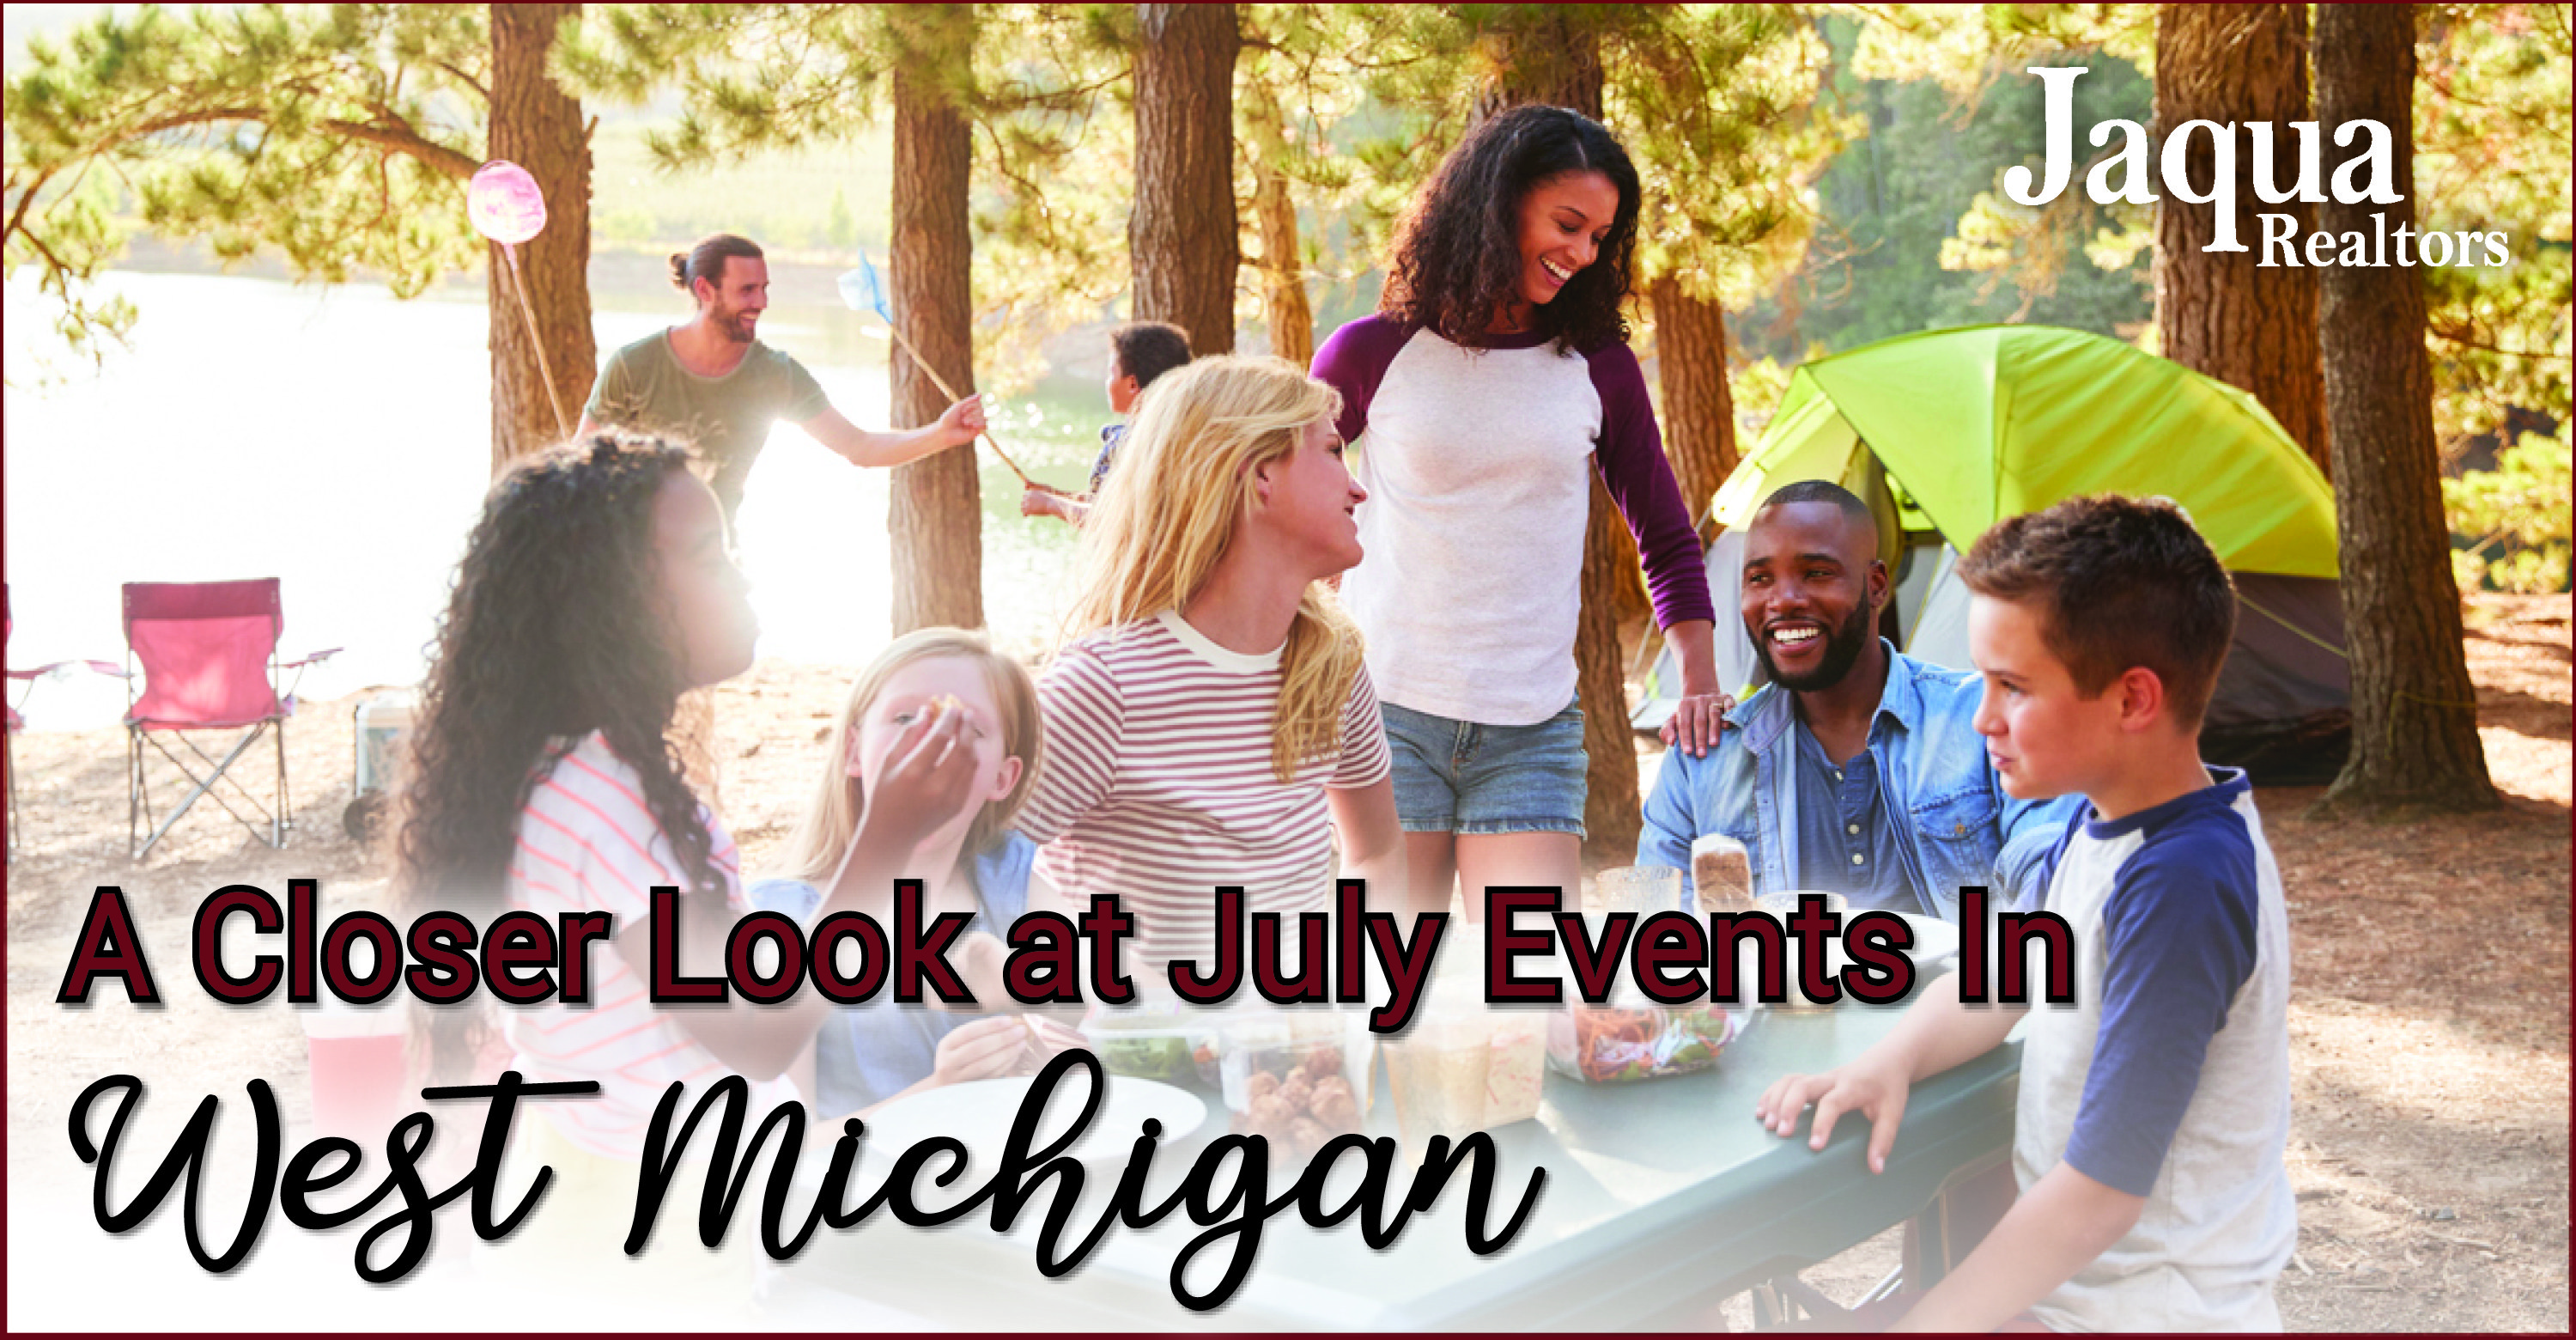 A Closer Look at July Events in West Michigan